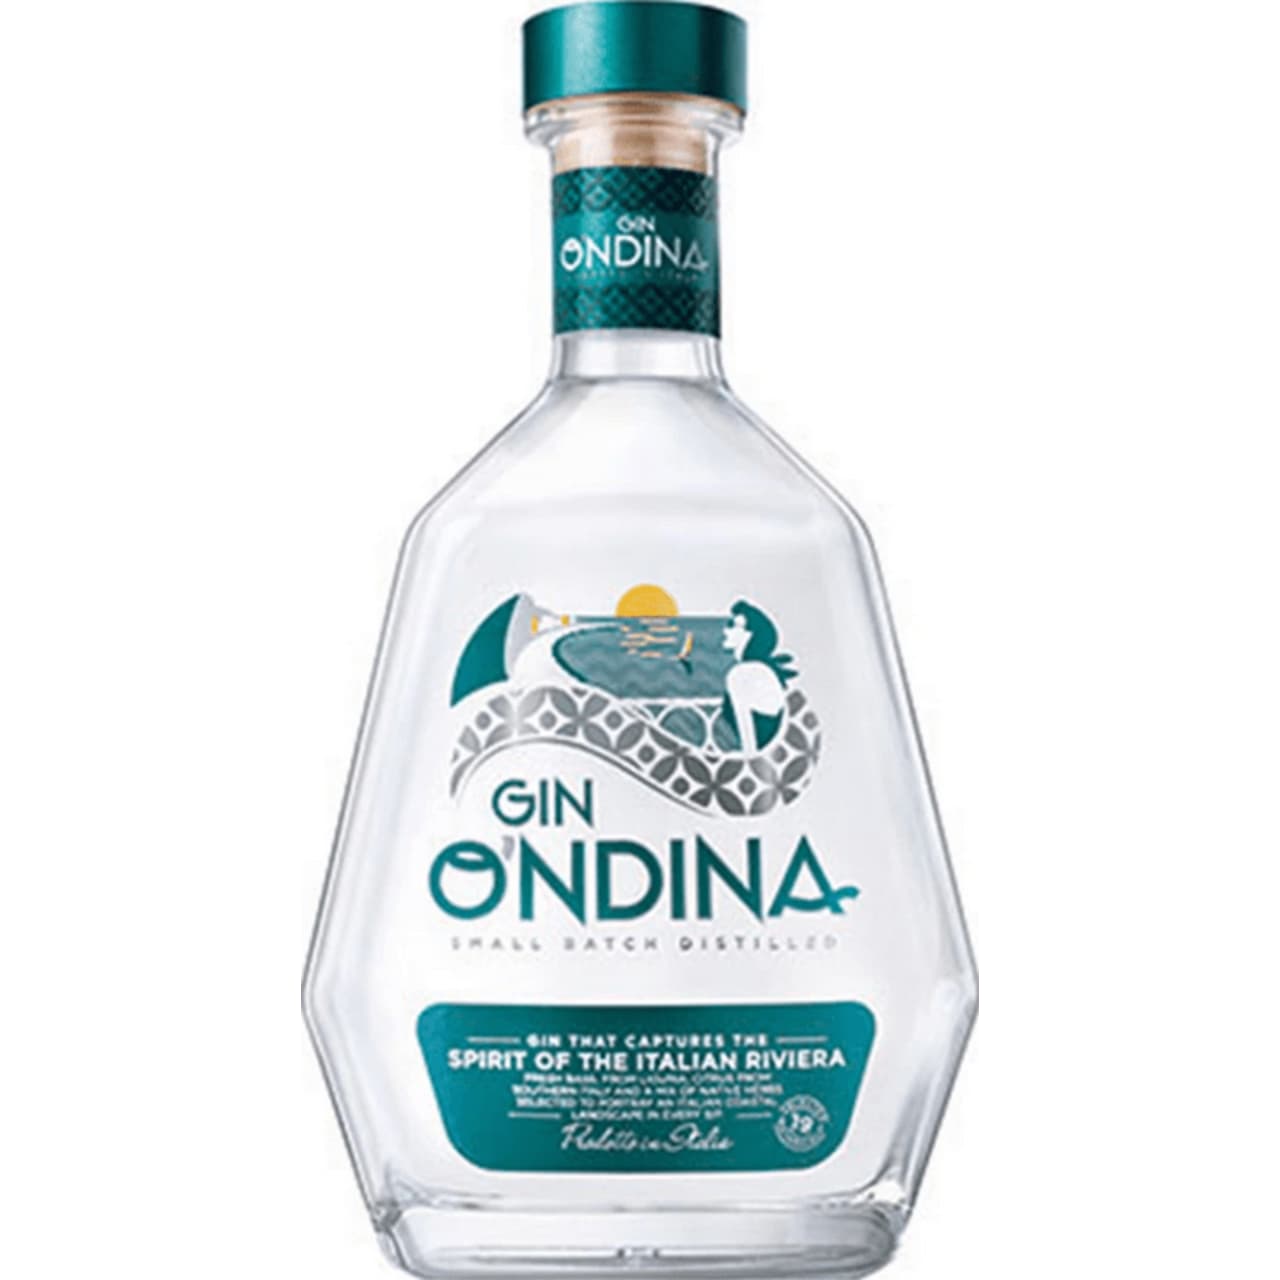 Distilled in small batches, the gin is made with 19 Italian botanicals – including fresh basil from Liguria and citrus from southern Italy. The combination of botanicals is said to create a “refreshing, herbaceous” flavour.